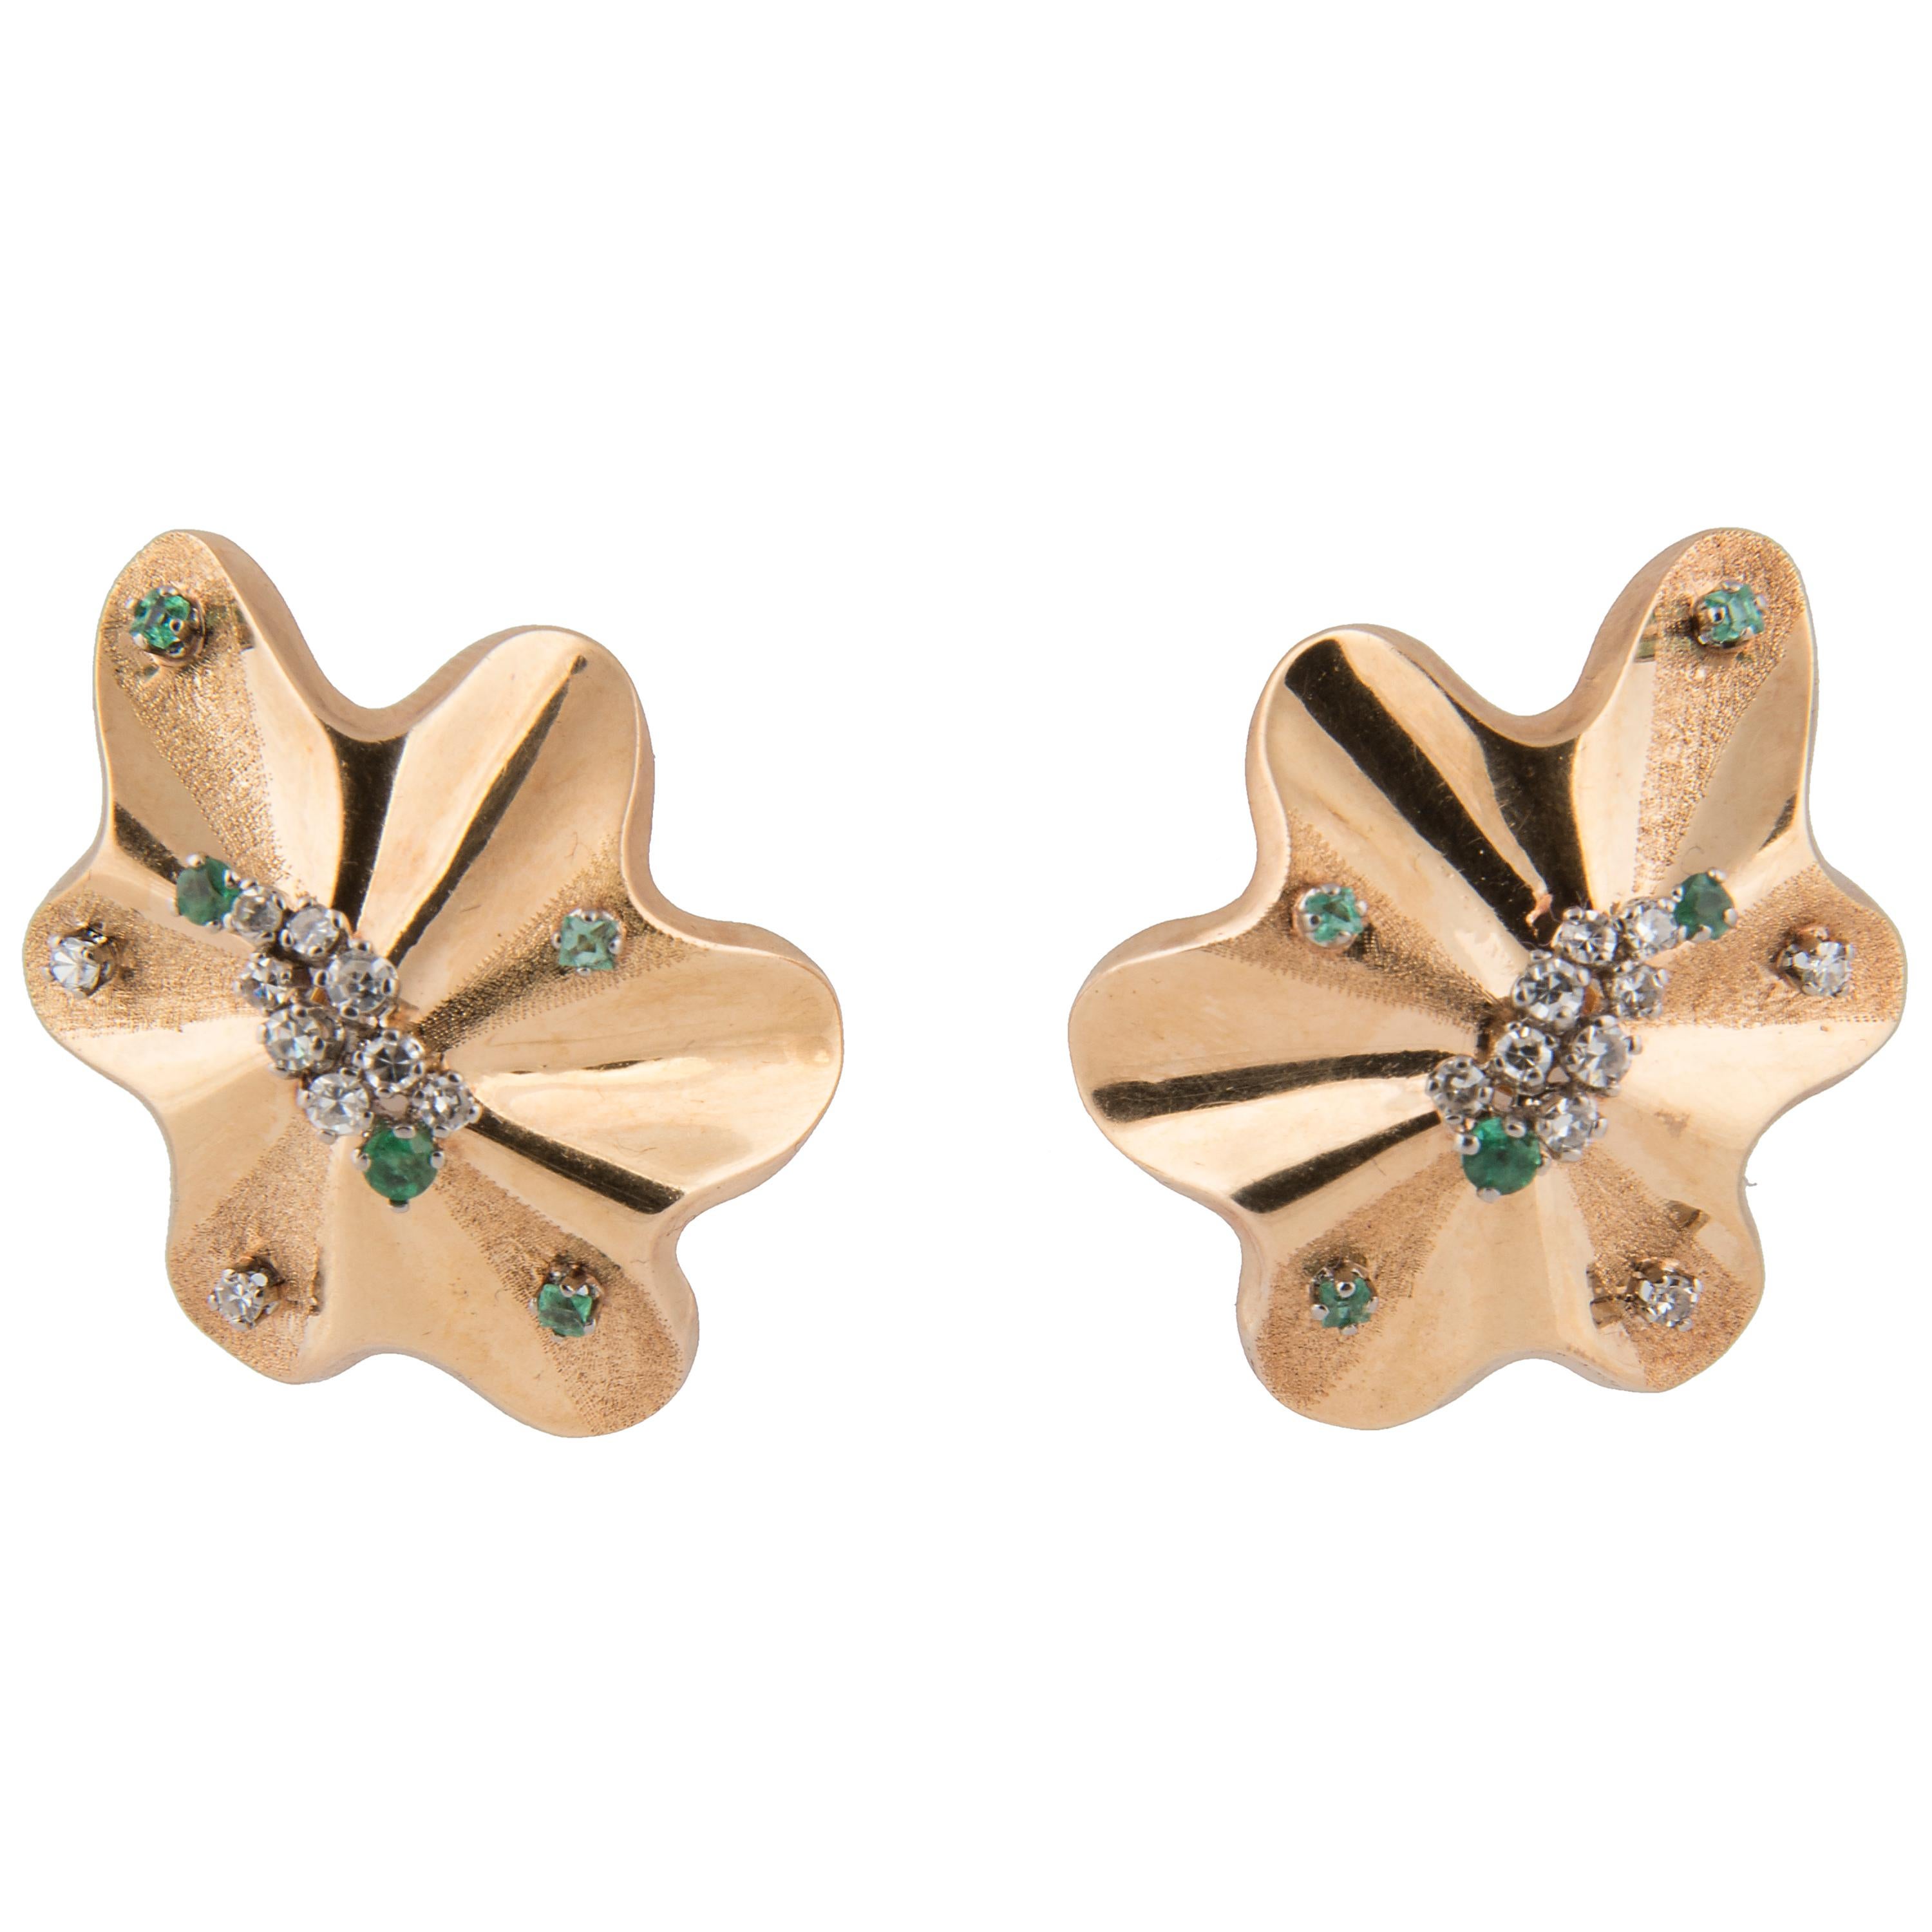 Pair of clip-on earrings, 18kt mat and polished gold set with diamond and emeralds
French import mark
Italy, 1970s
